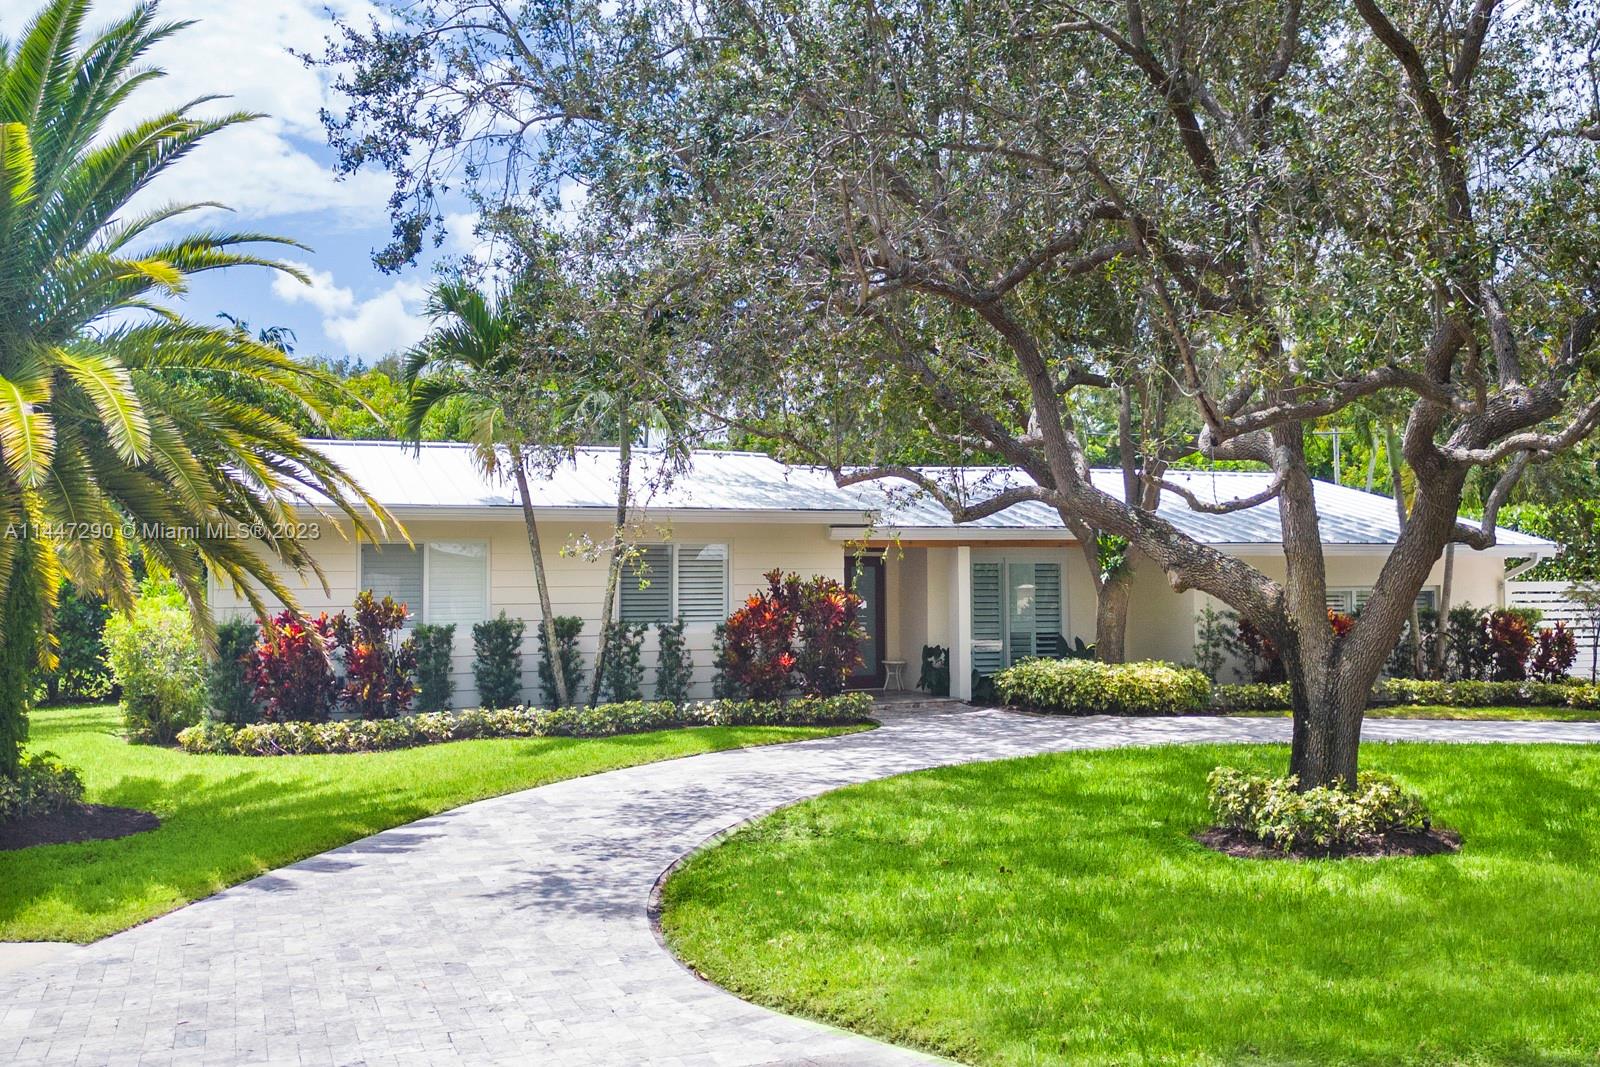 7200 Sw 130th St St, Pinecrest, Miami-Dade County, Florida - 4 Bedrooms  
3 Bathrooms - 